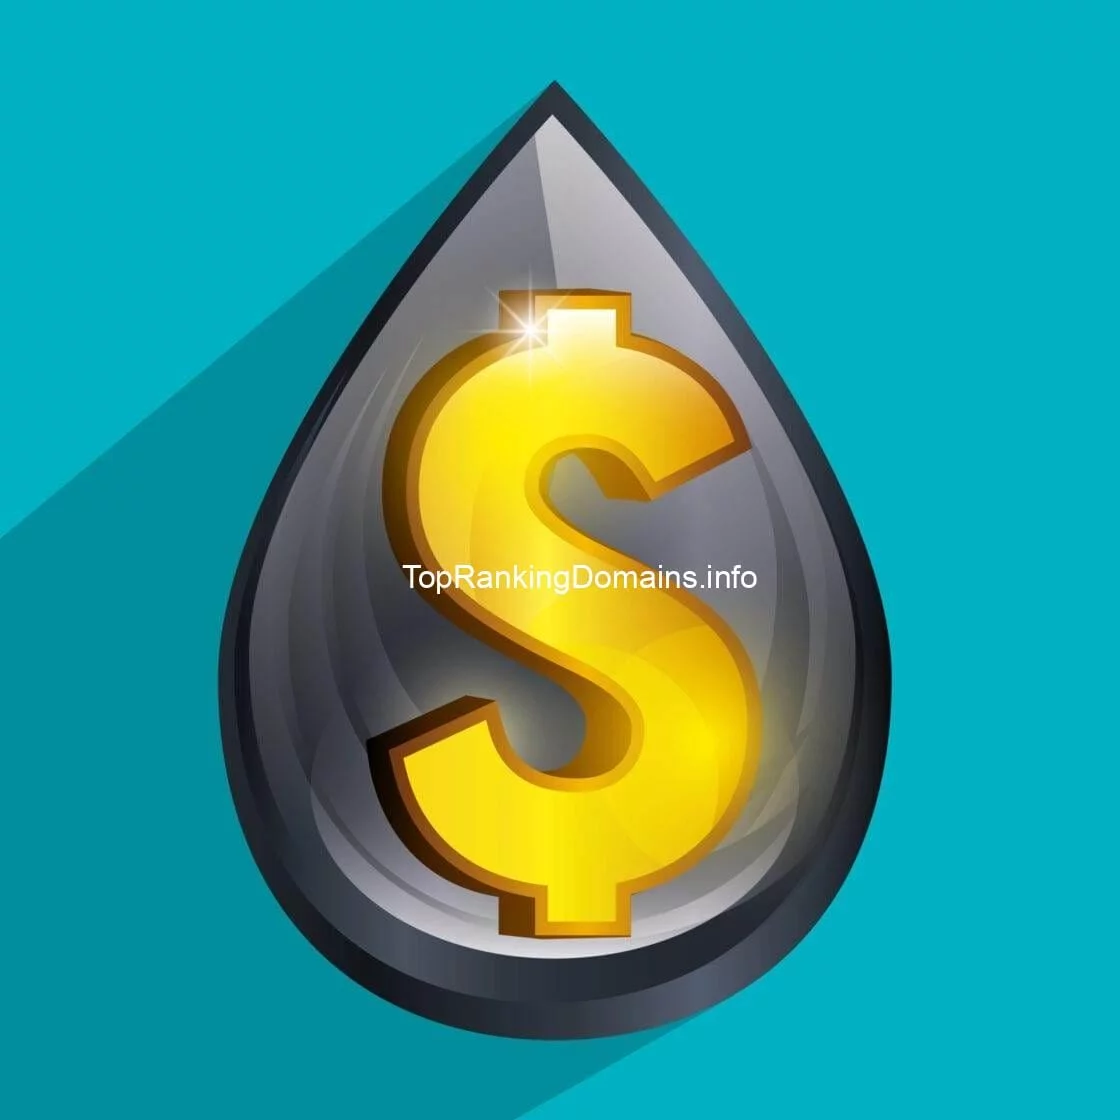 A stylized graphic of a shiny golden dollar sign embedded within a dark drop shape, against a blue angular background, with the text "toprankingdomains.info" displayed.